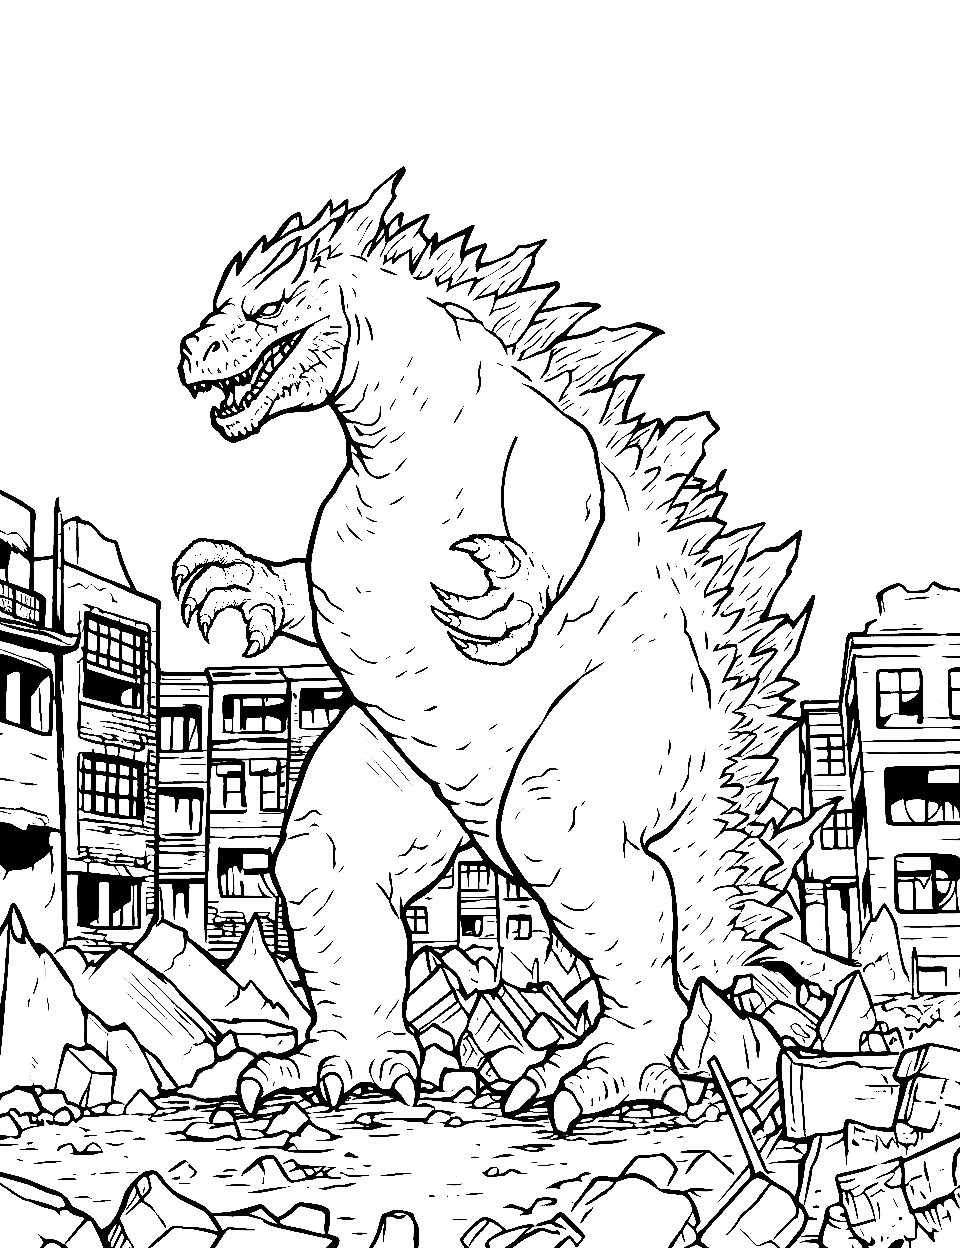 City in Ruins Coloring Page - Godzilla walking among the ruins of the city after his fierce fight.